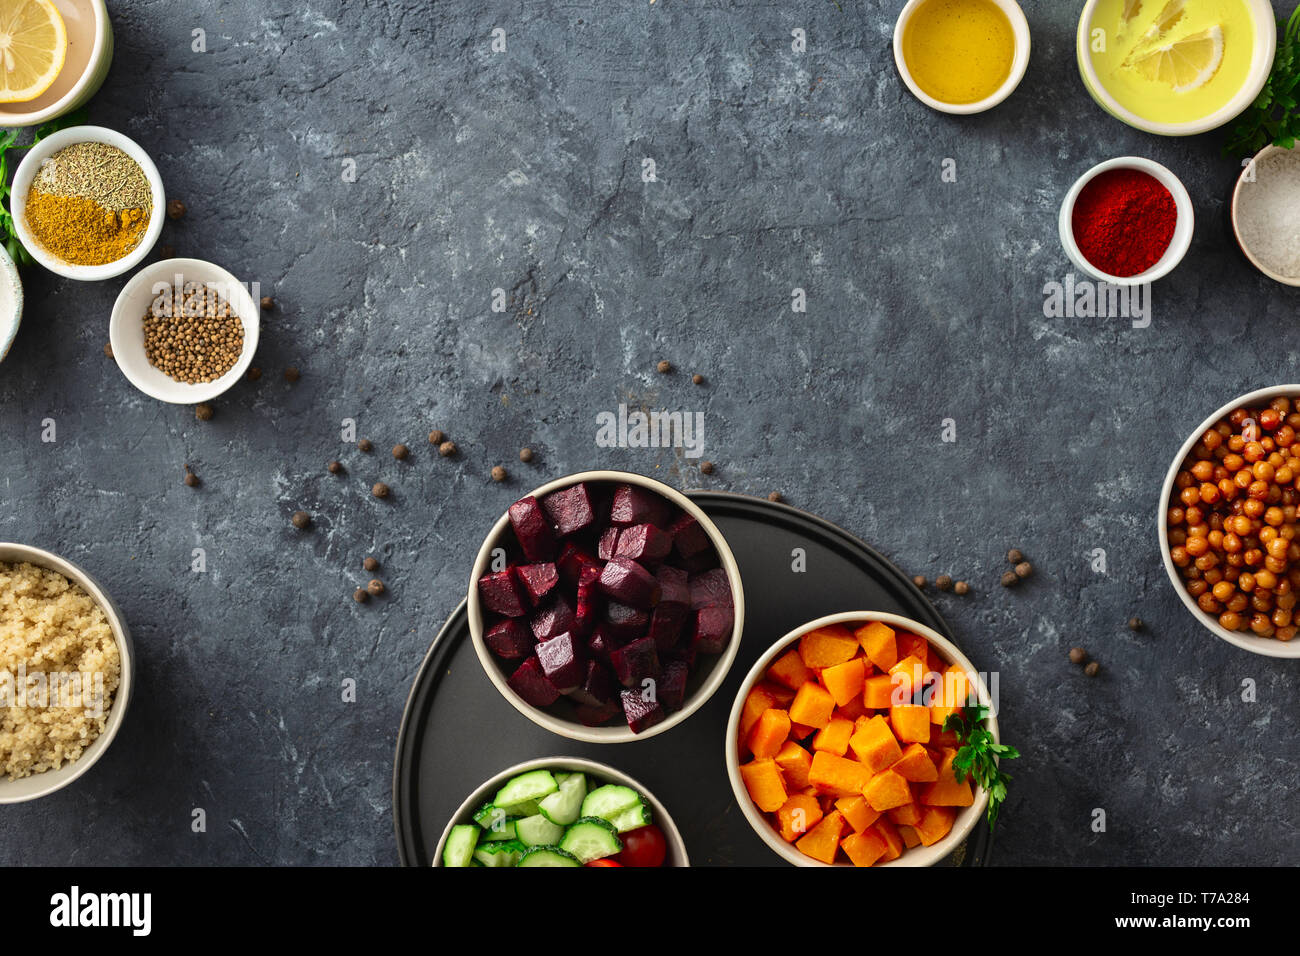 Set food for cooking healthy vegetarian food. Spiced chickpeas, baked pumpkin and beets, quinoa and vegetables on dark stone background with copy spac Stock Photo